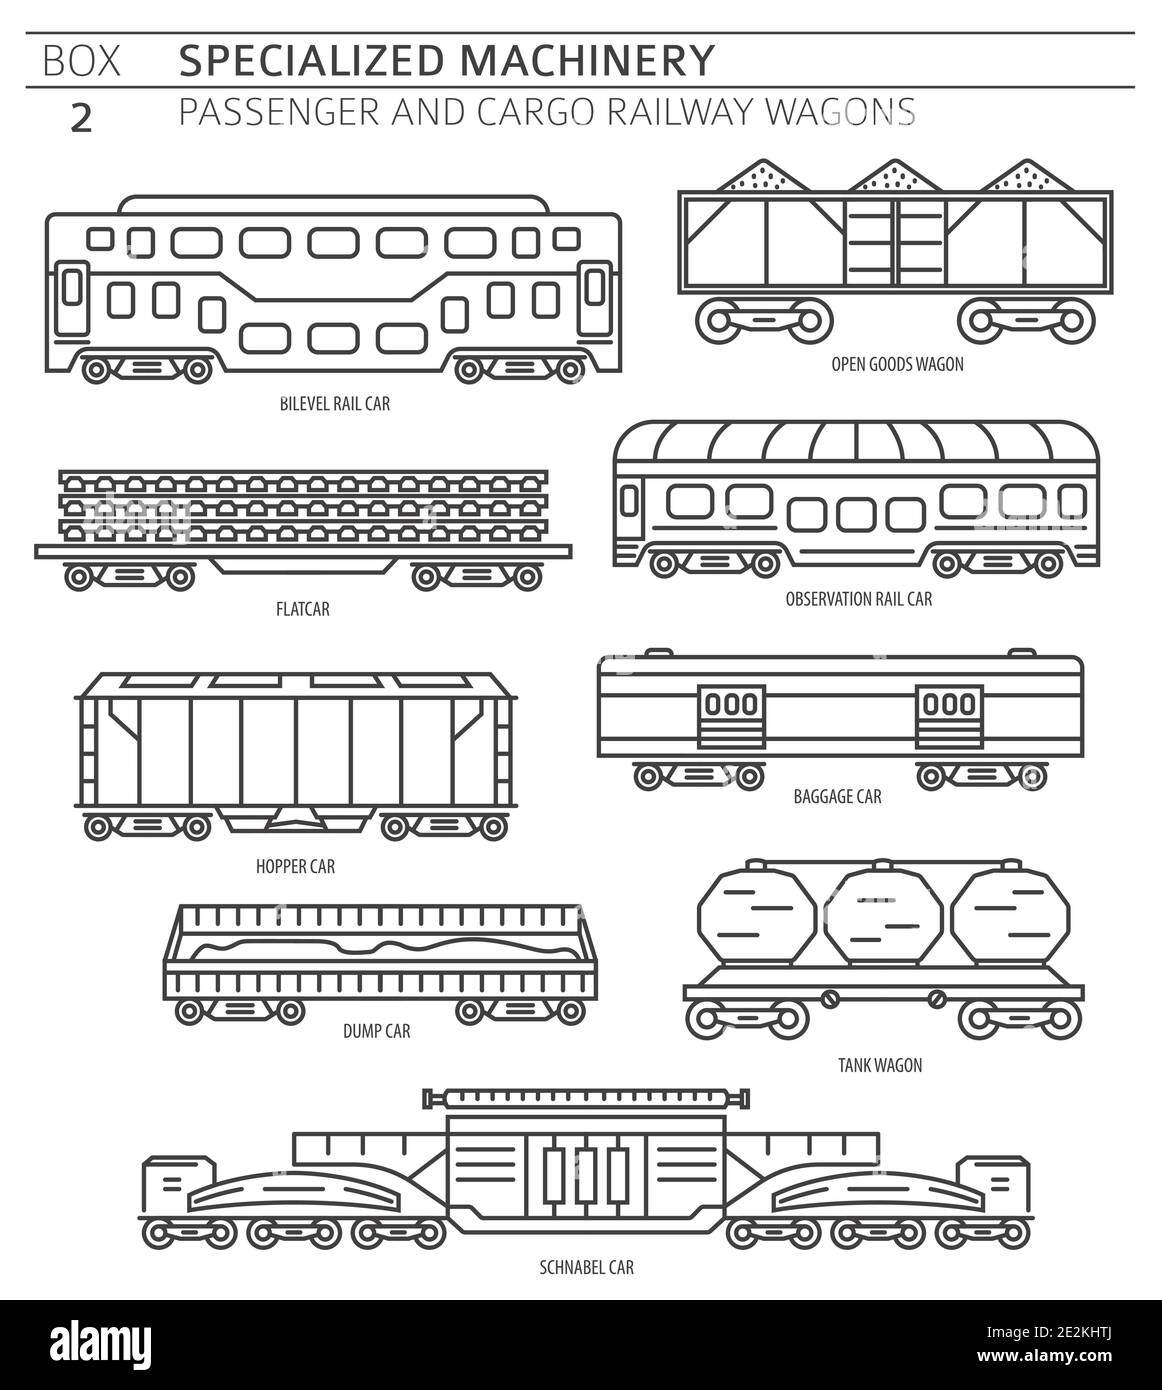 Special machinery collection. Passenger and cargo railway wagons linear vector icon set isolated on white. Illustration Stock Vector